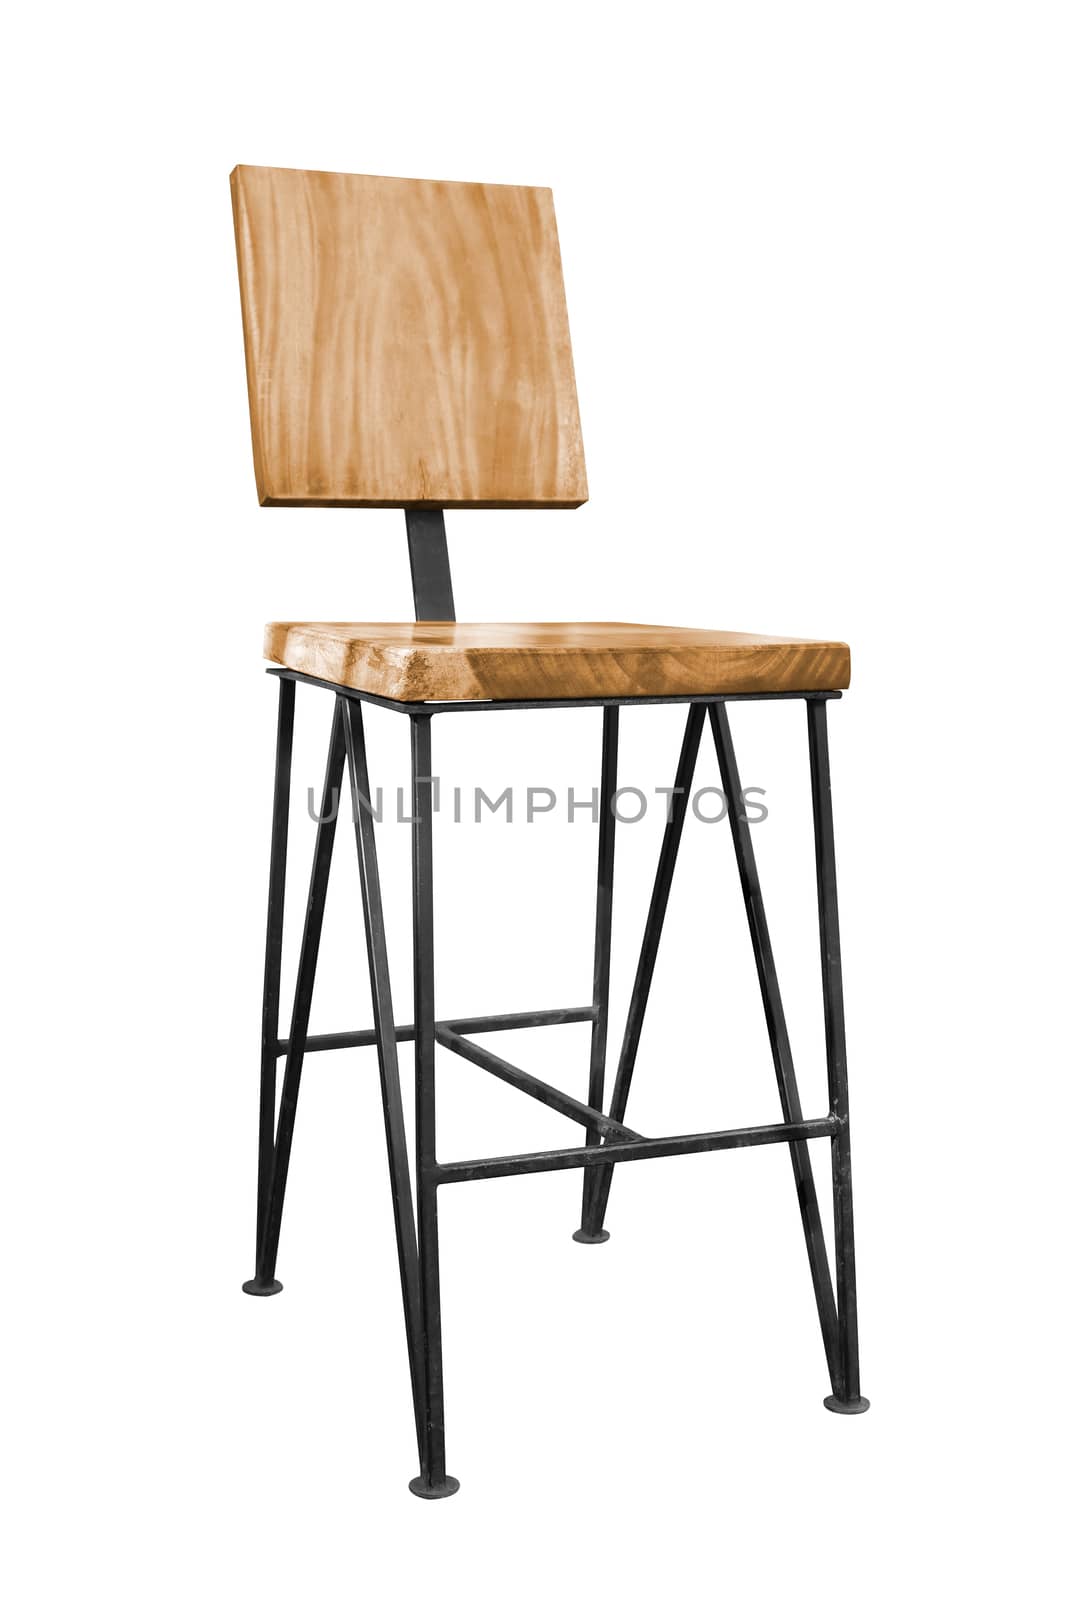 Modern wooden chair steel legs isolated. by NuwatPhoto